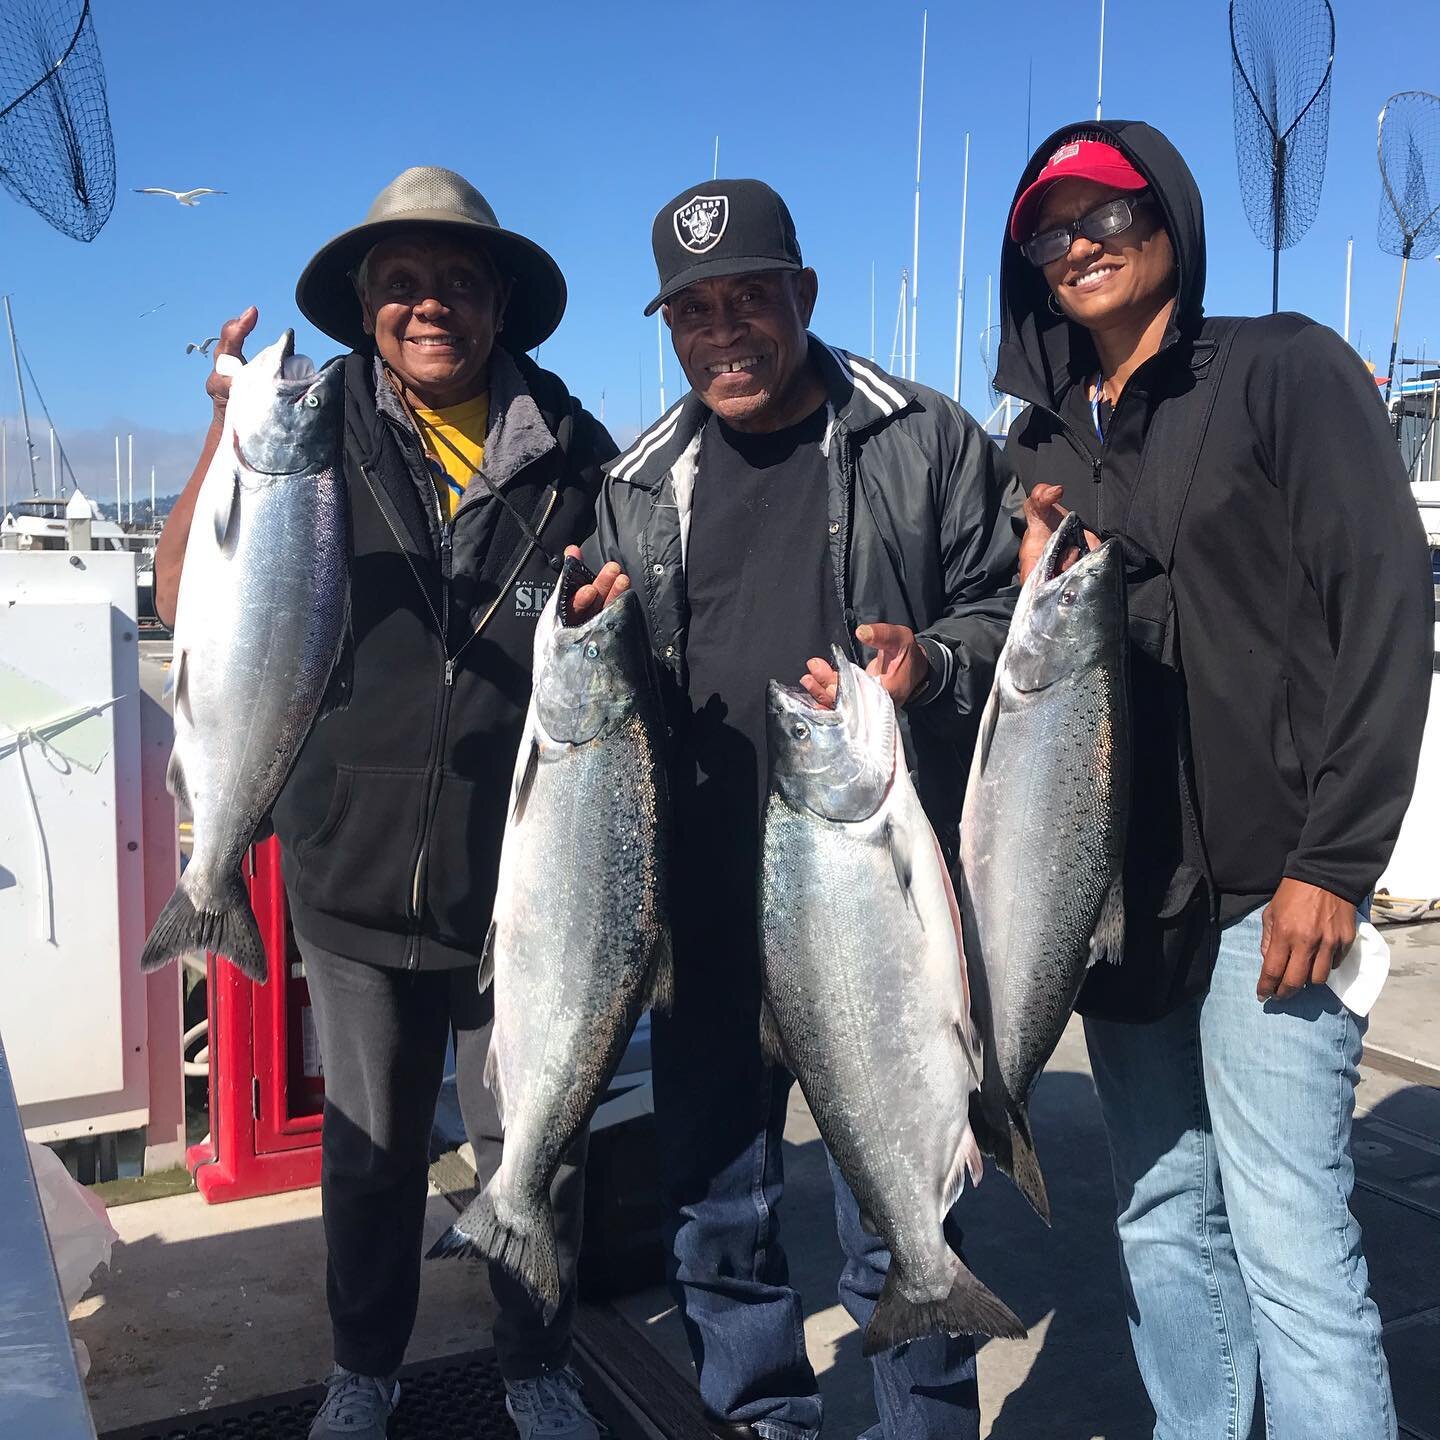 We ended our day with 22 salmon to 22 lbs for 14 anglers. We had a lot of opportunities today but everyone went home with fish! #fishemeryville #pacificpearlcharters.com #salmon #sfbayareafishing #thisiswhy